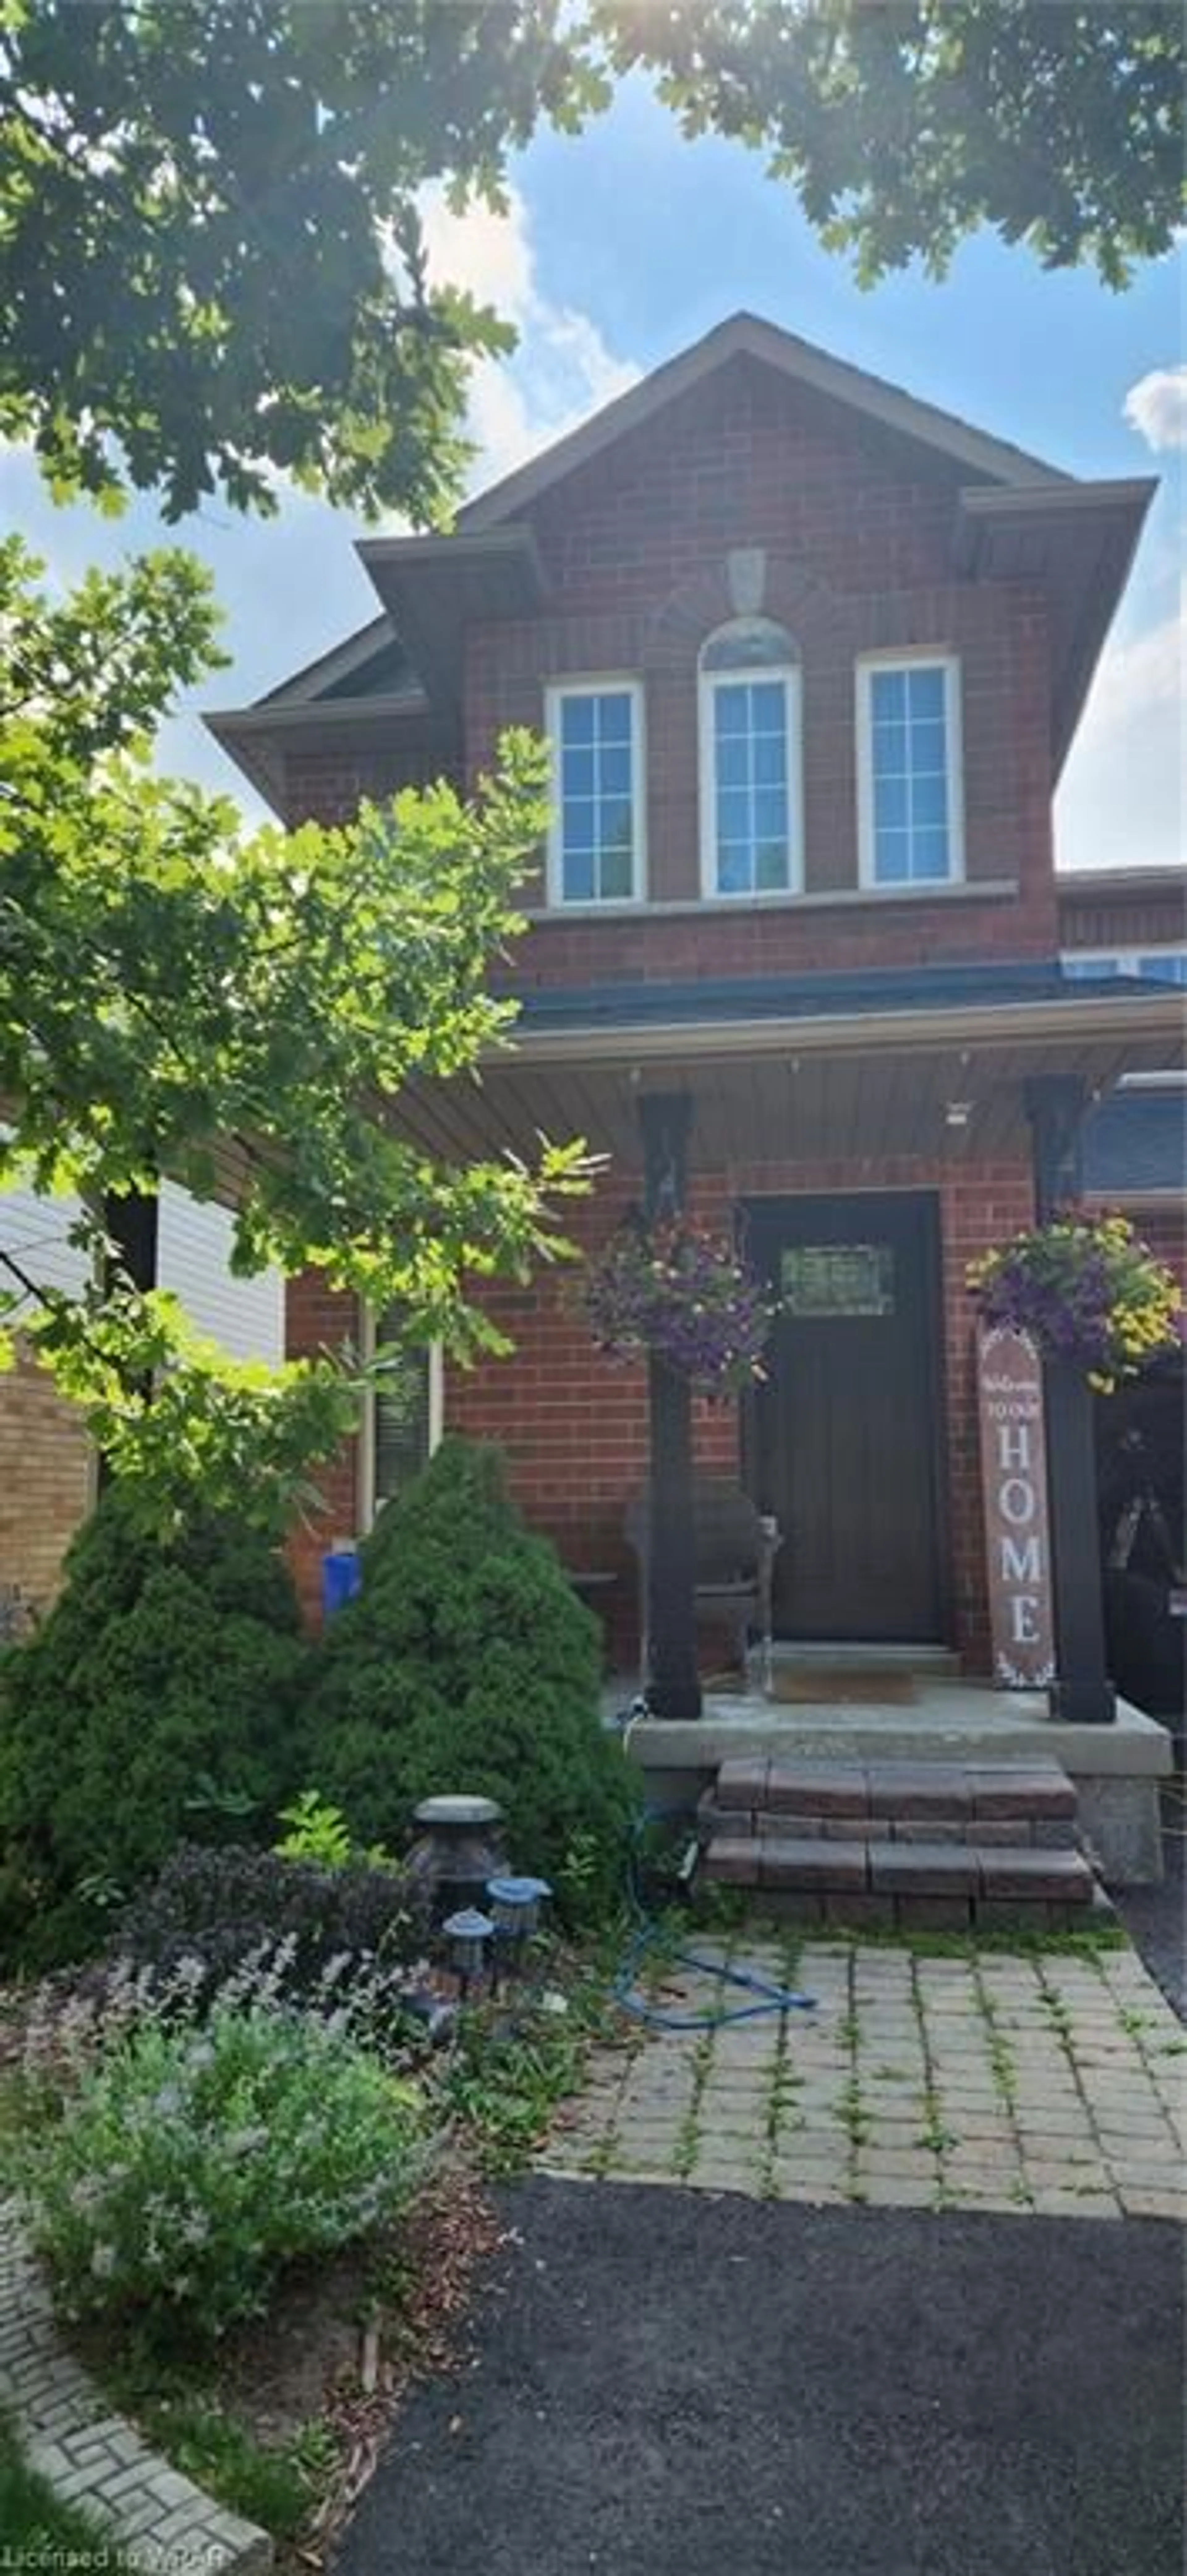 Home with brick exterior material for 112 Flockhart Rd, Cambridge Ontario N1P 1G3